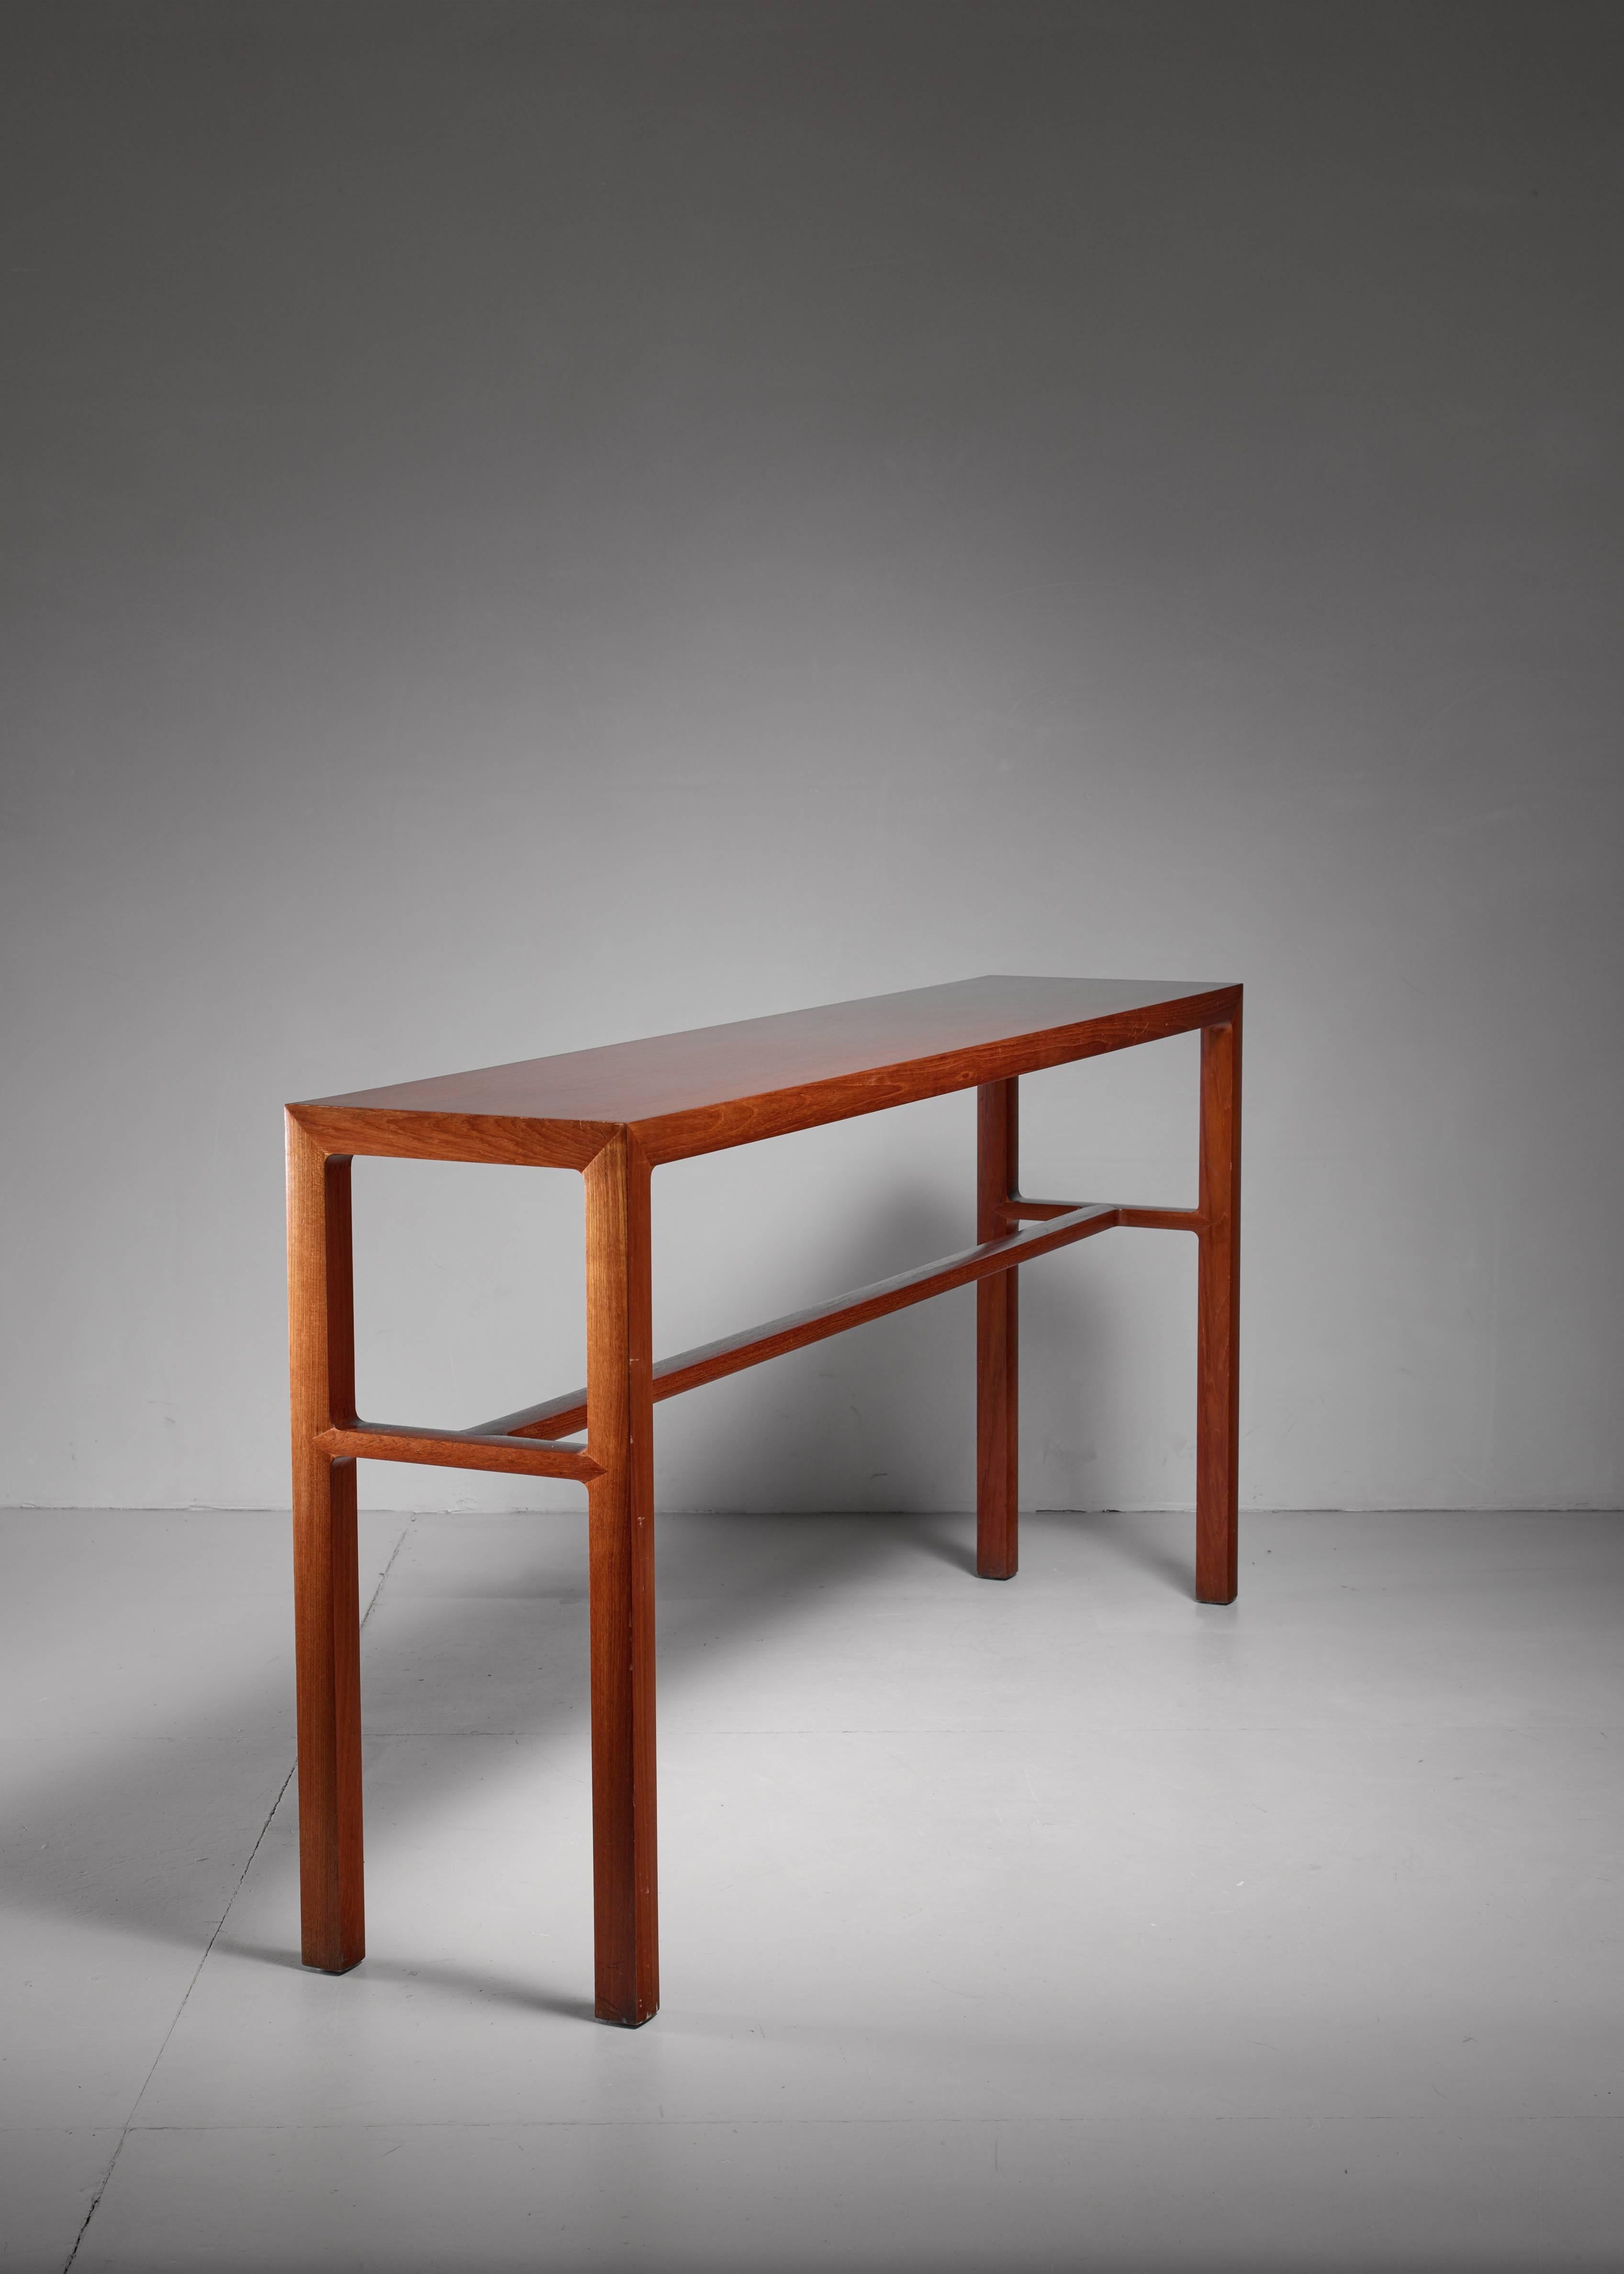 A long, rectangular cherrywood console table. The table has rounded edges and a beautiful rich minimalism.
* This piece is offered to you by Bloomberry, Amsterdam *